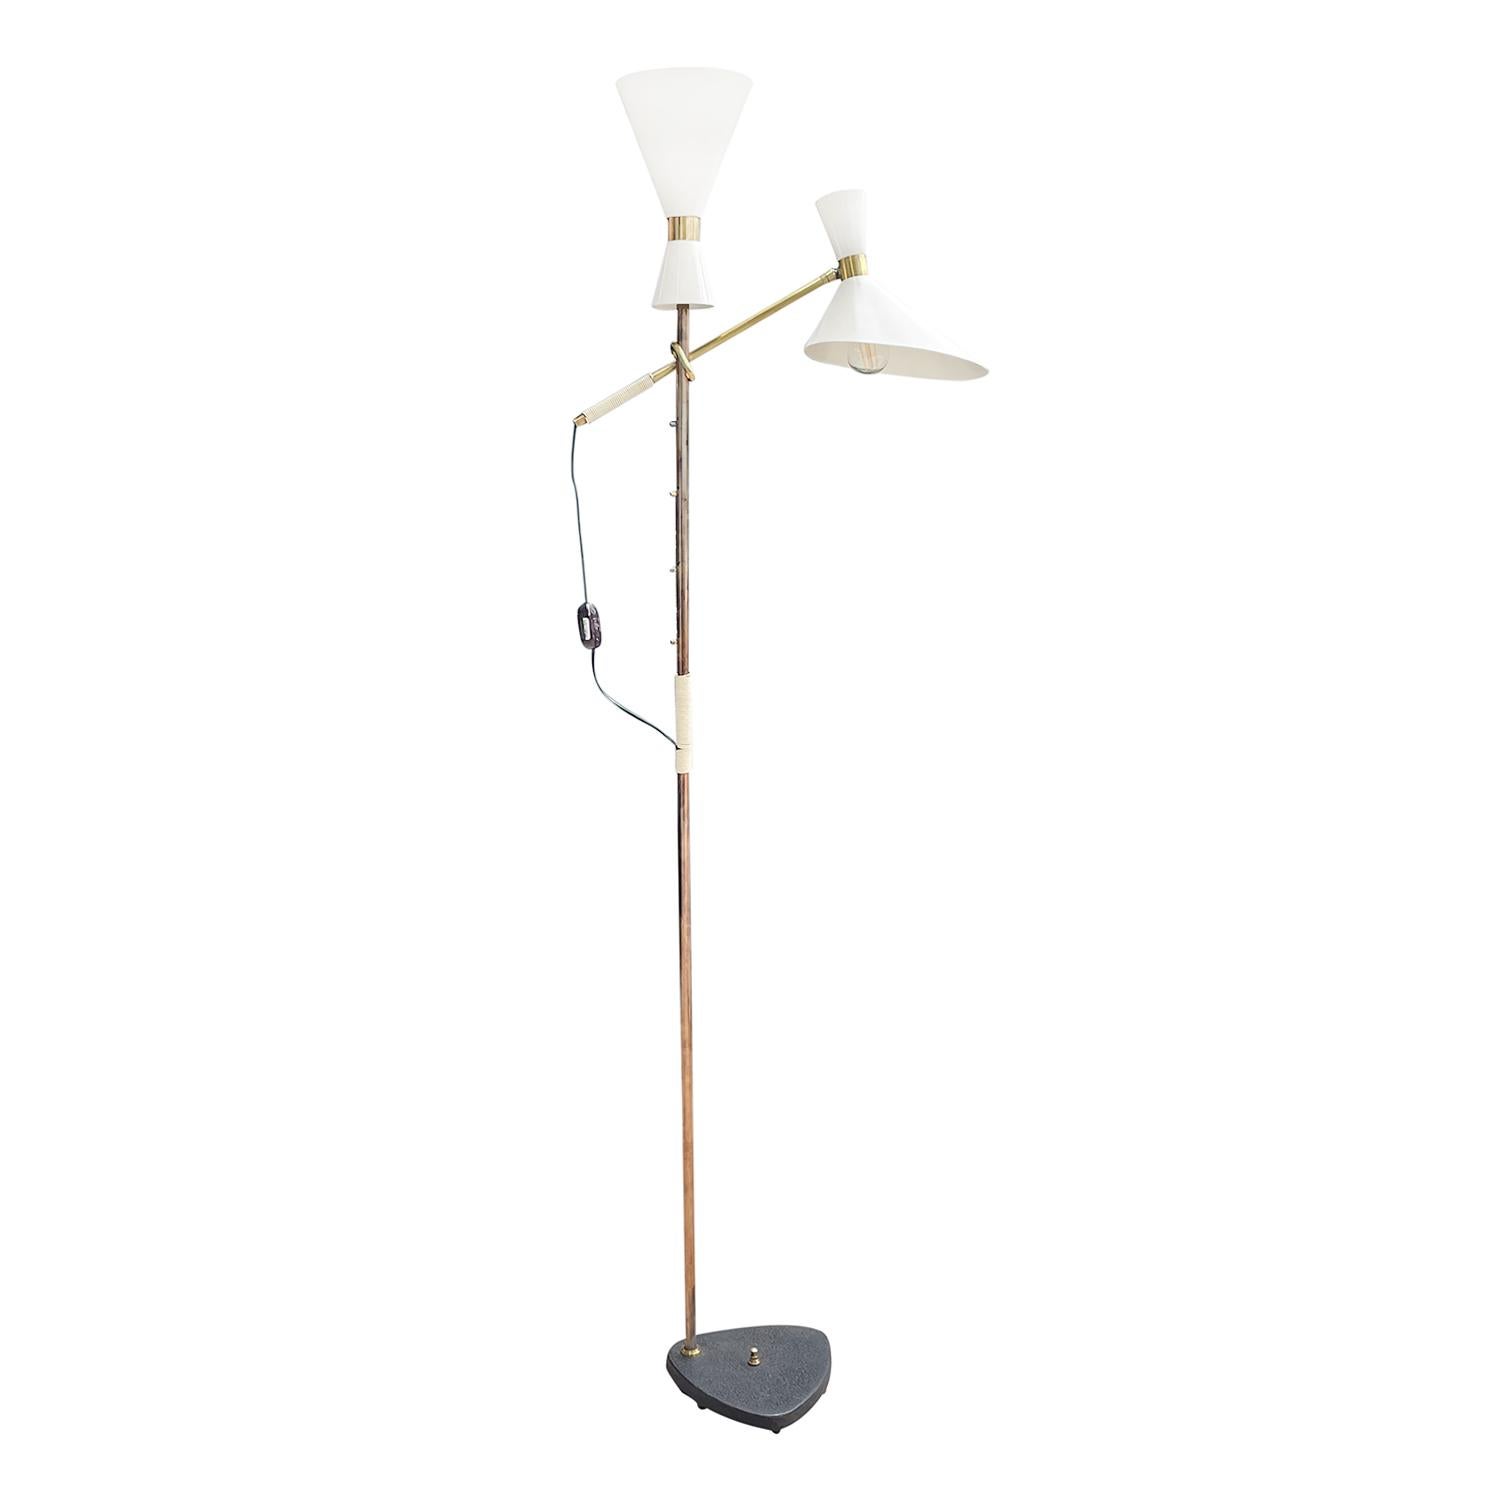 A vintage Mid-Century modern Austrian floor lamp made of hand crafted lacquered metal, designed by Julius Theodor (J.T.) Kalmar and produced by Kalmar in good condition. The large shade is supported by a flexible, adjustable polished brass arm, each